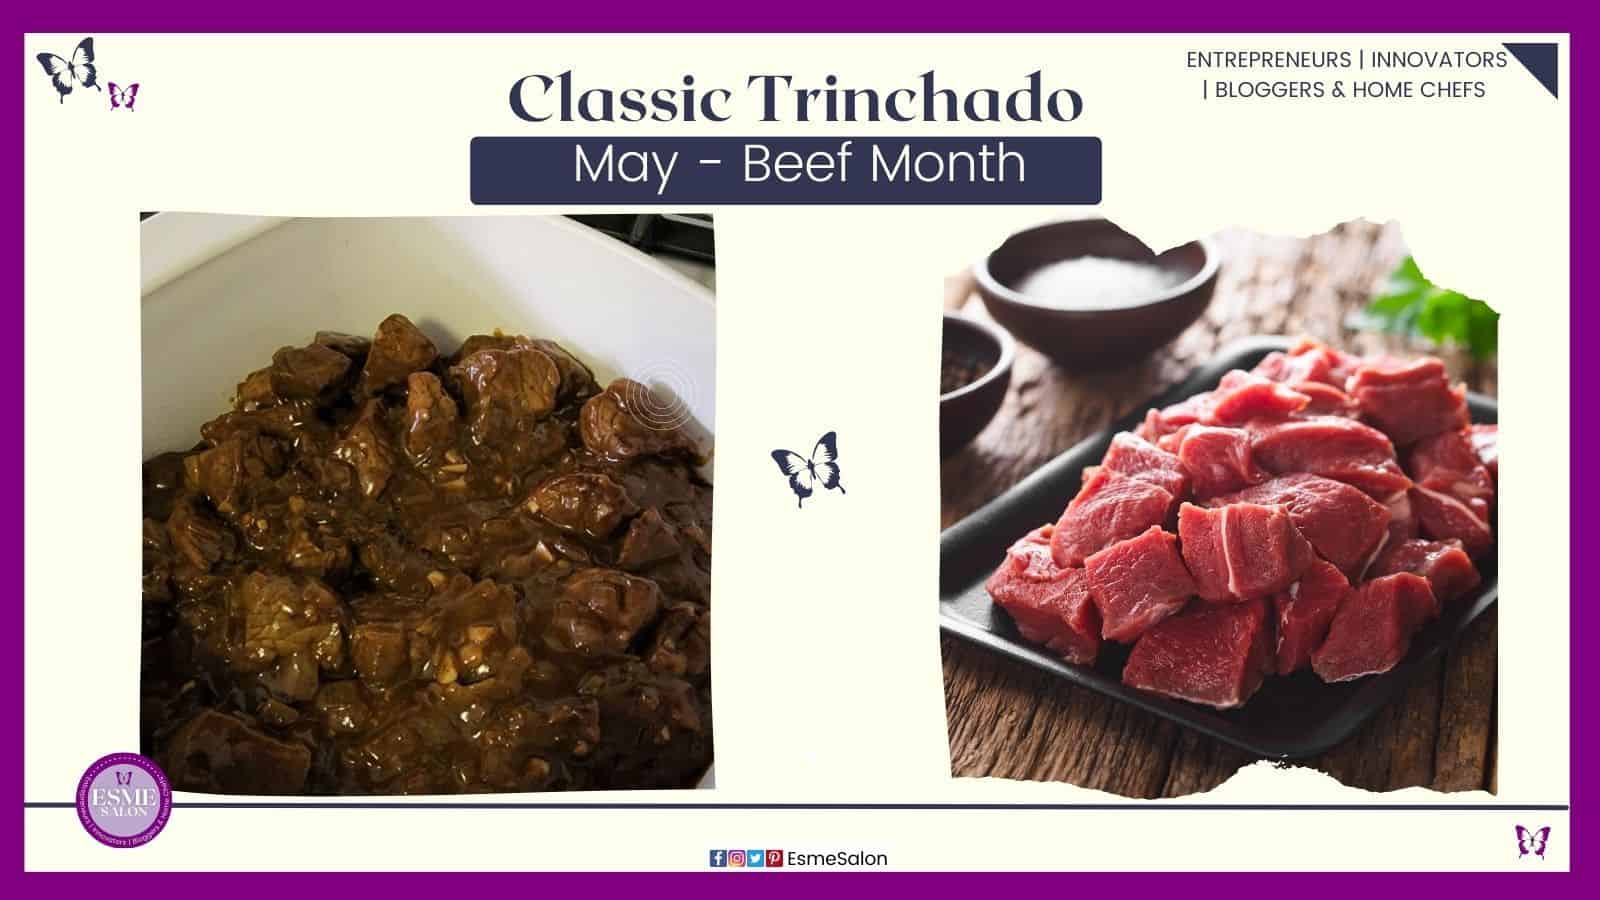 an image of a Classic South African Cubed Beef dish called Classic Trinchado